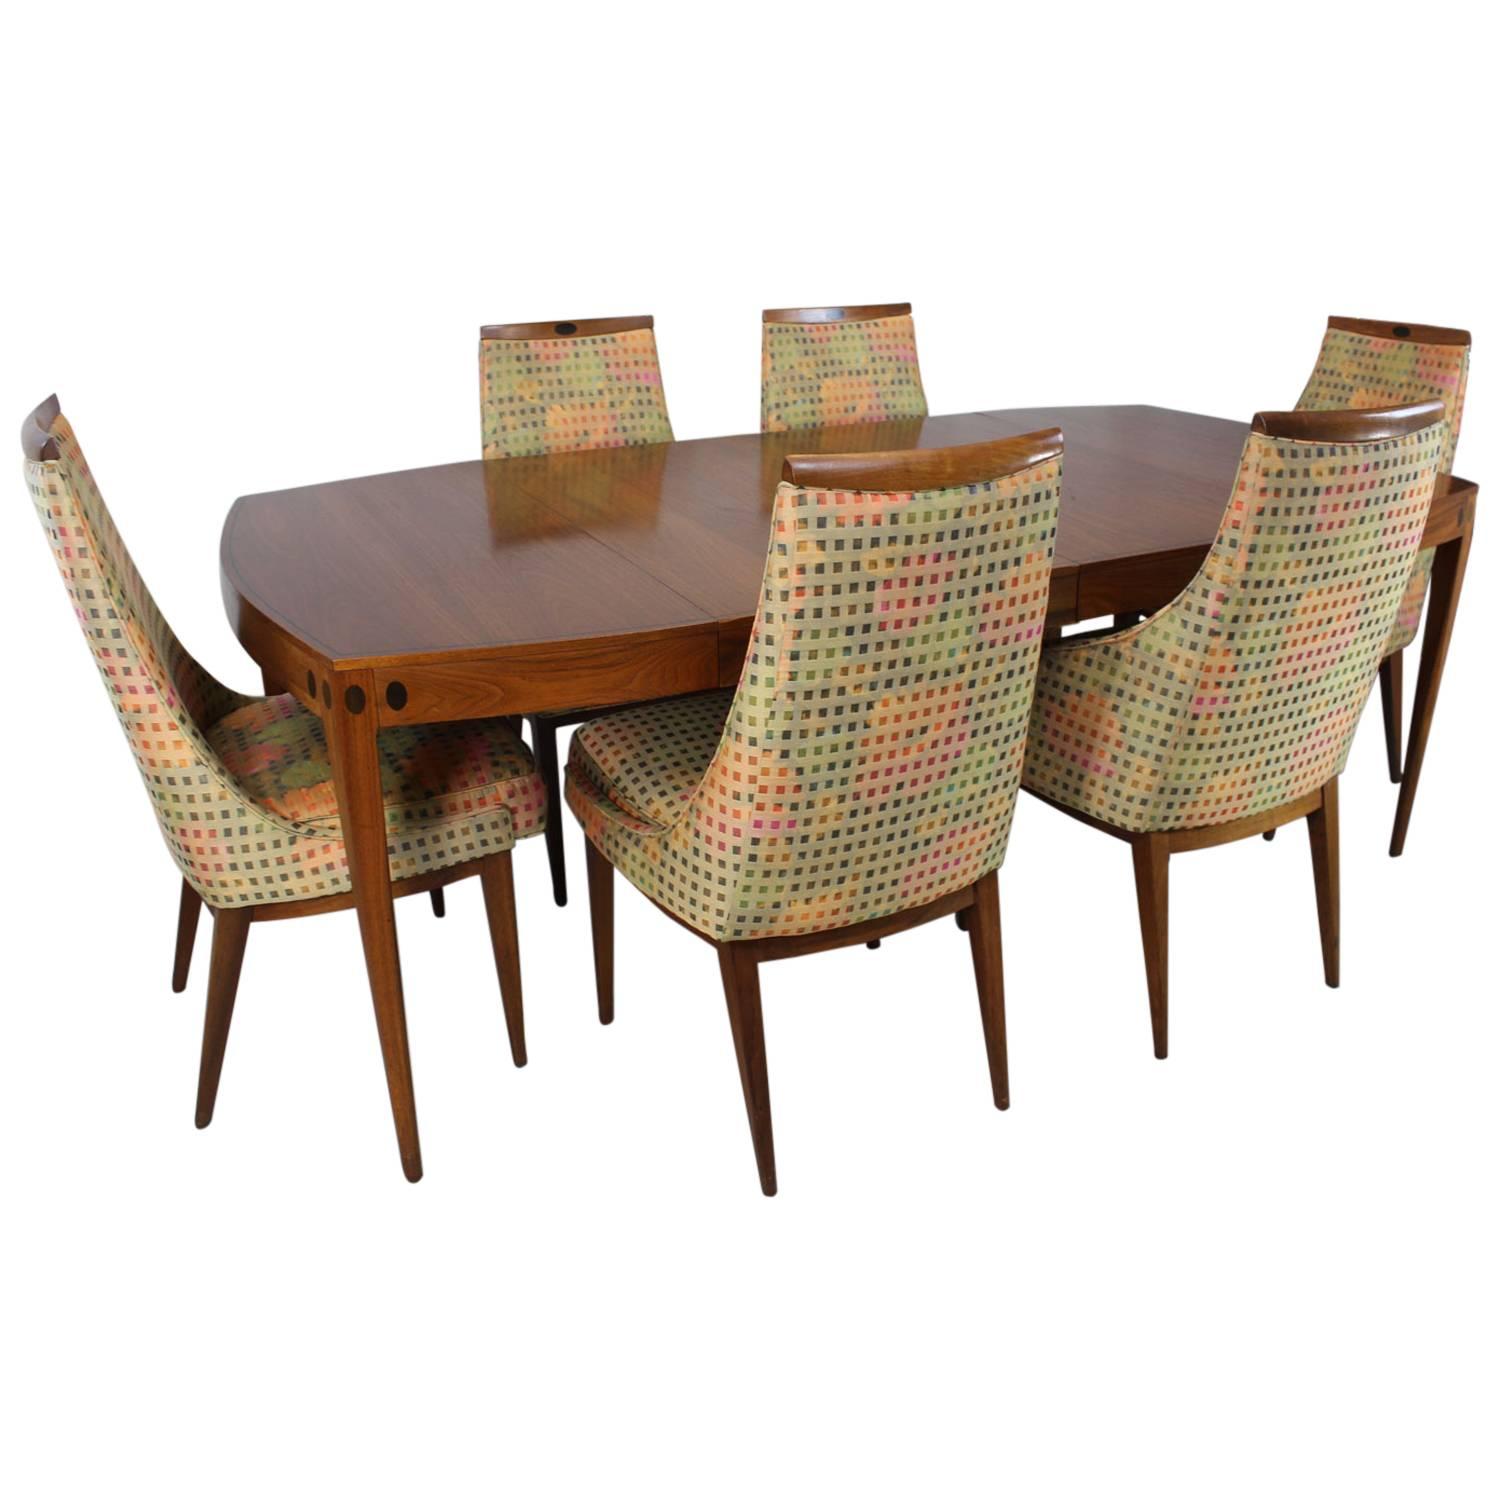 Kipp Stewart "Directional" Dining Table and Chairs for Calvin